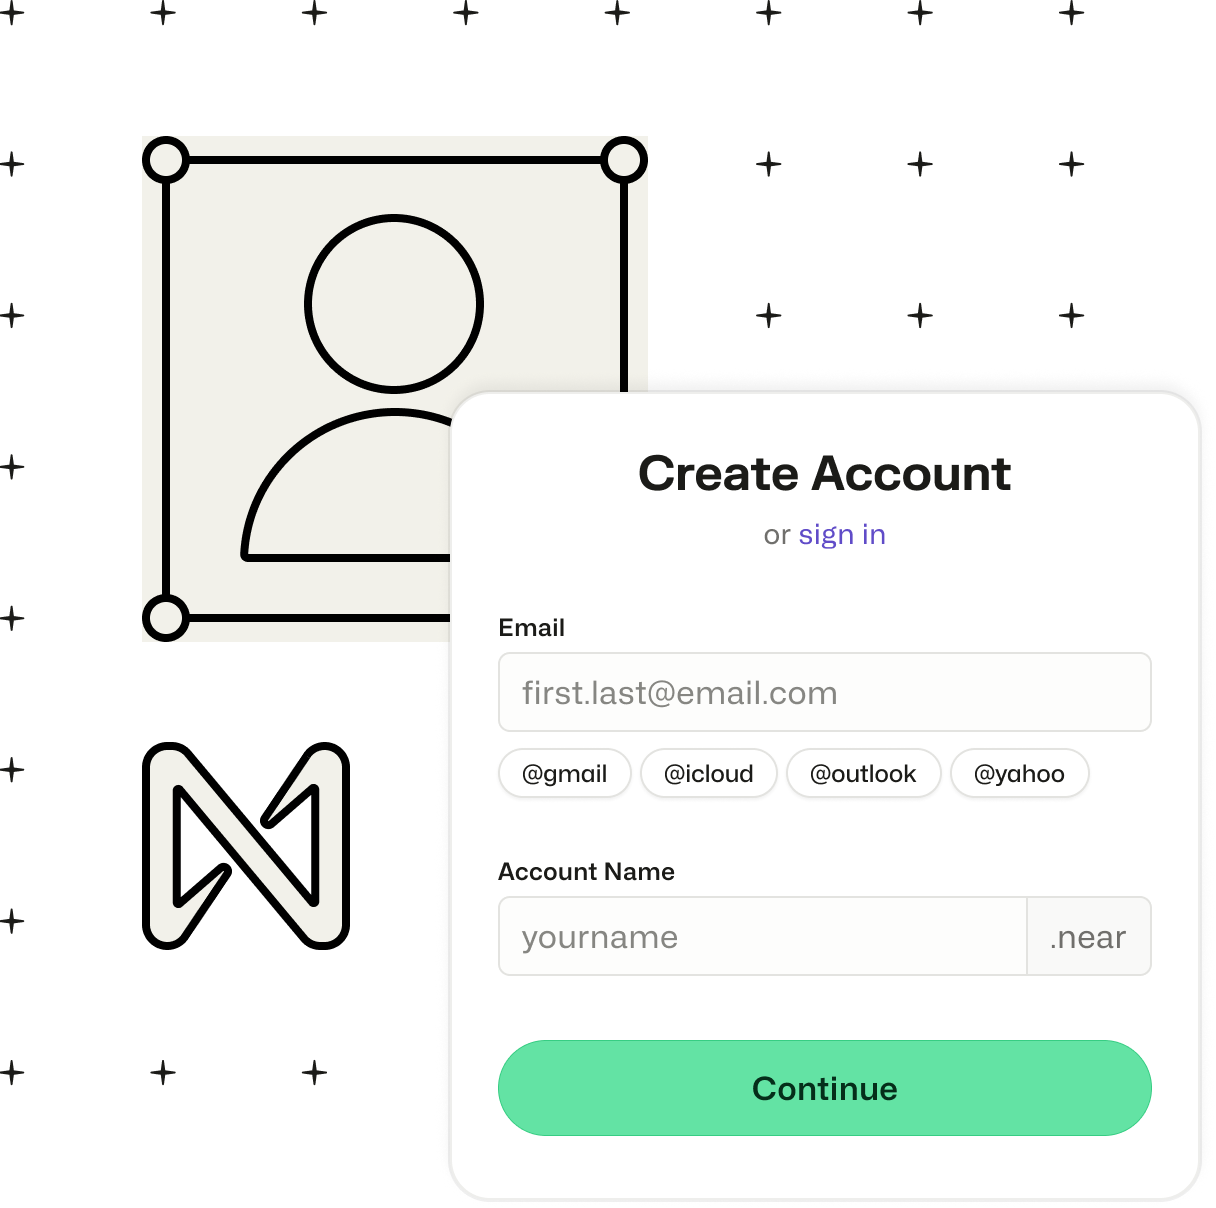 A line drawing of a user avatar and the NEAR logo set behind the Create Account screen from FastAuth